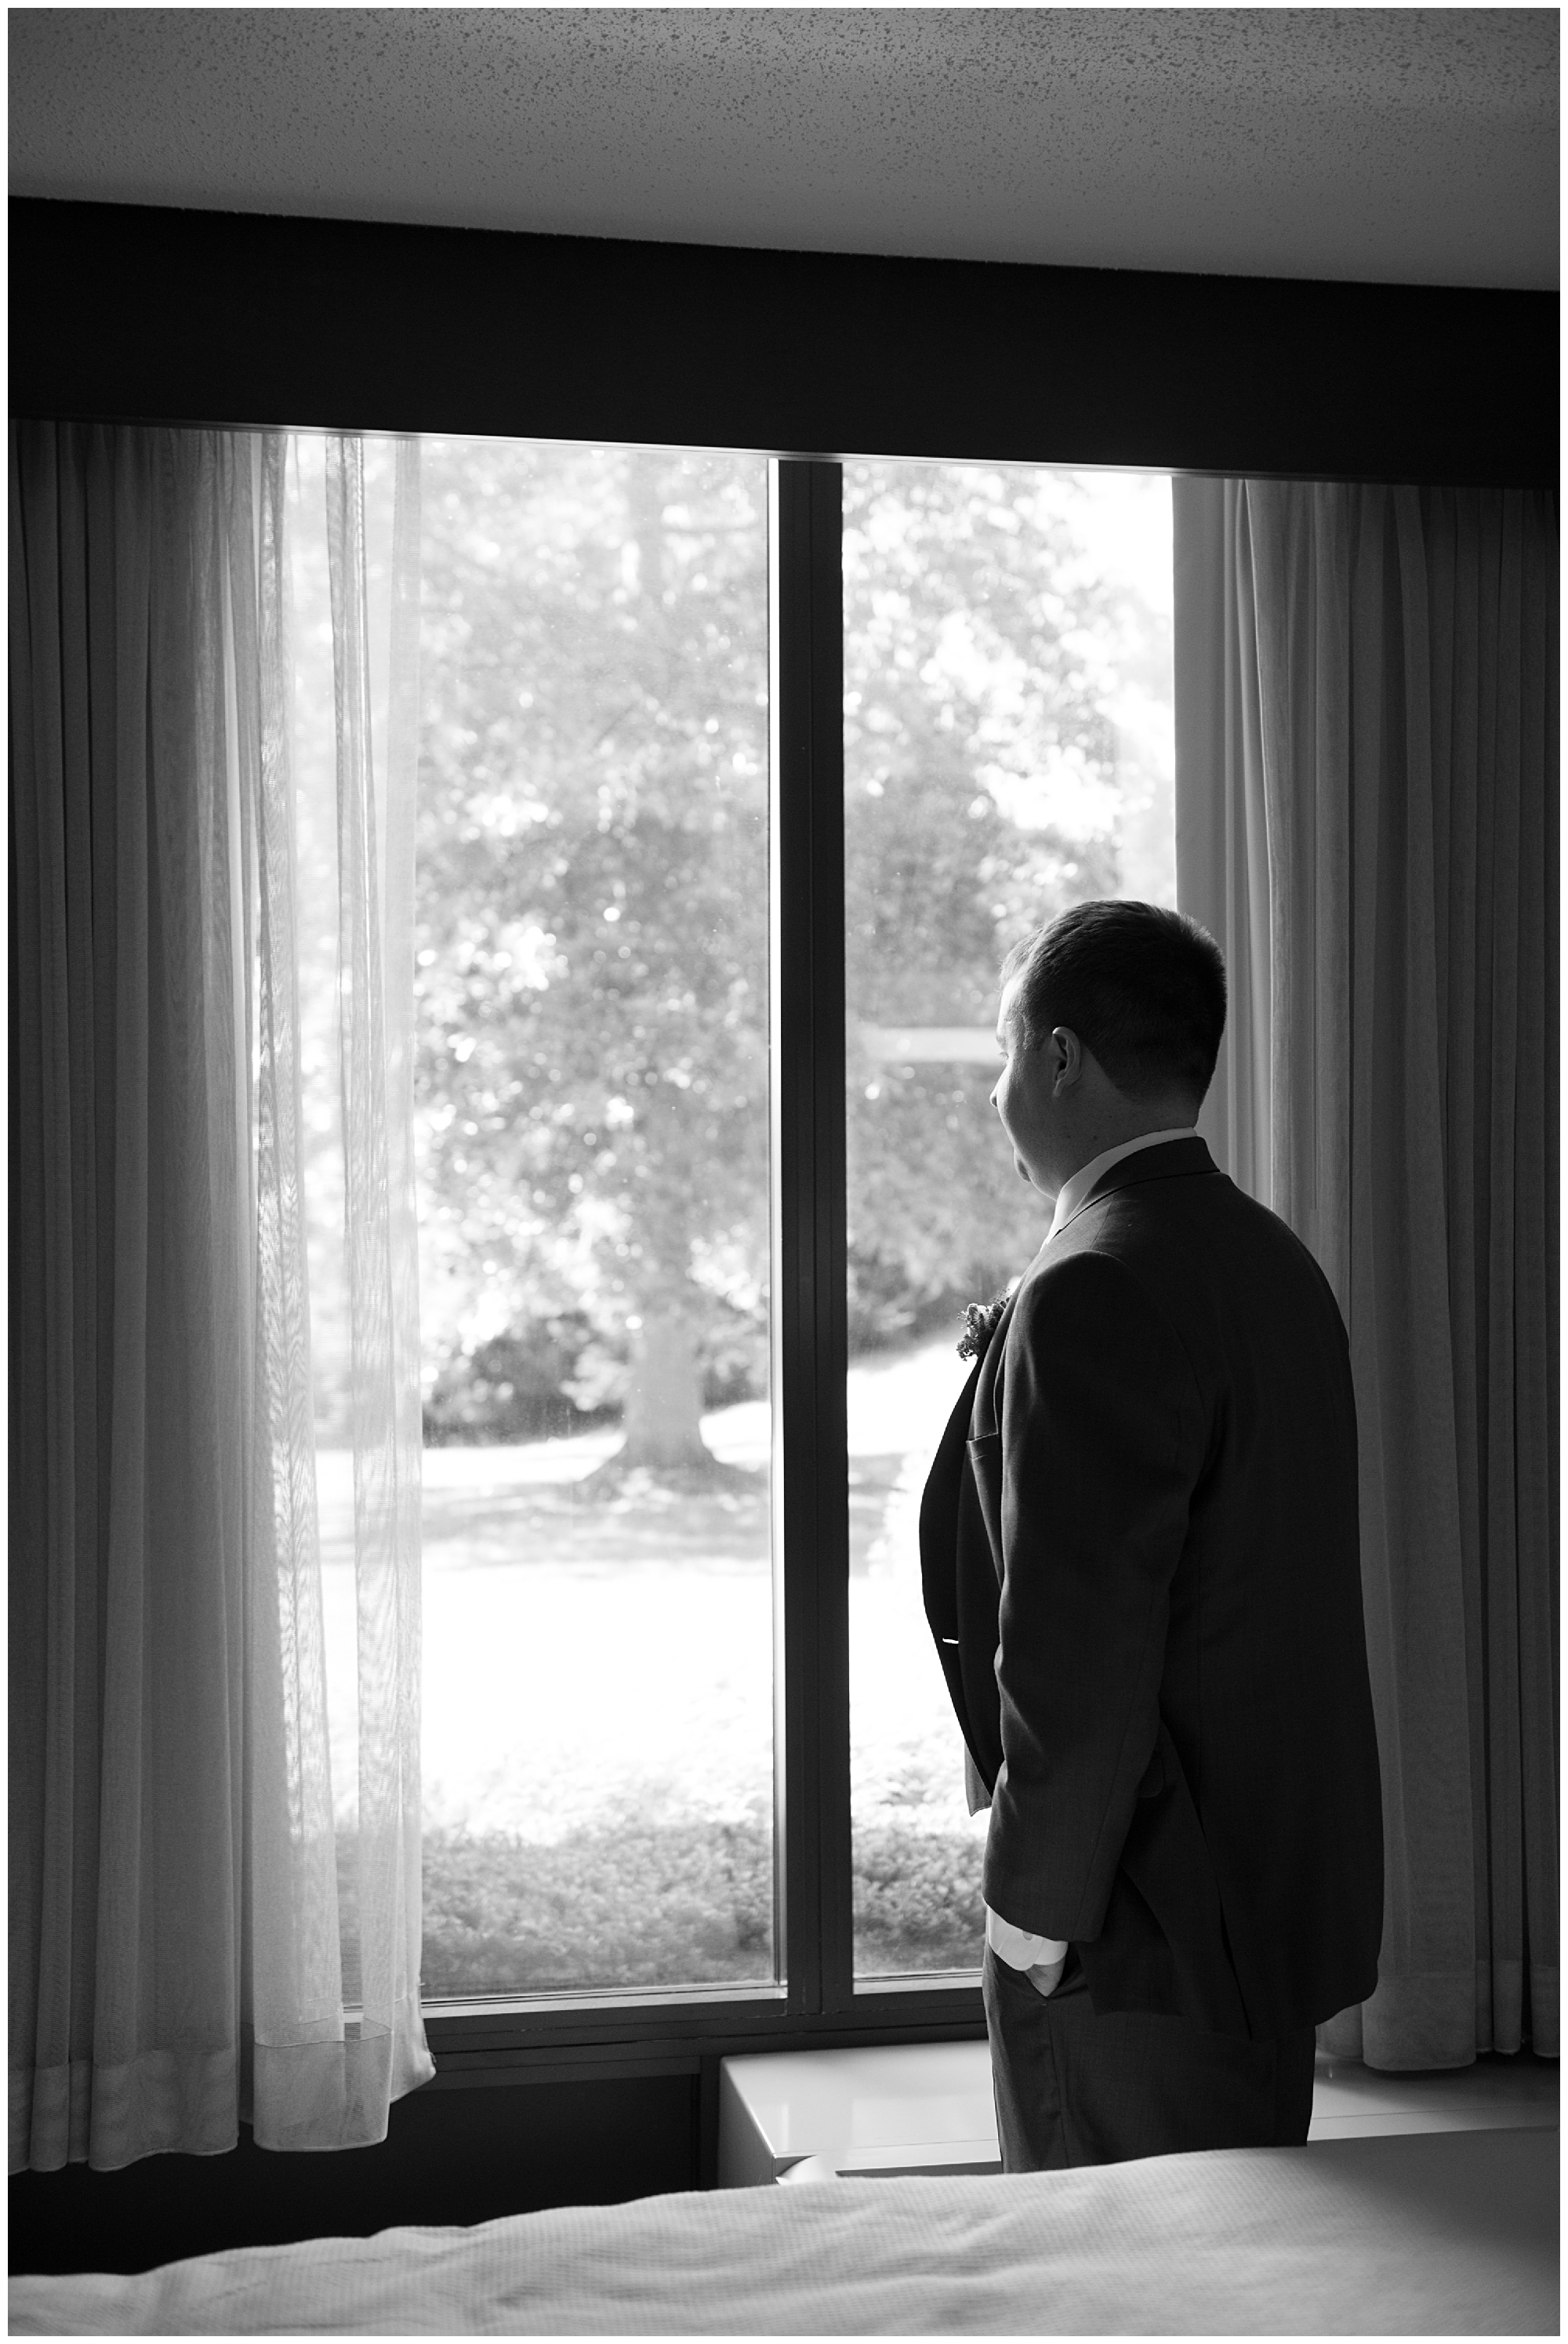 The groom looks out a window 